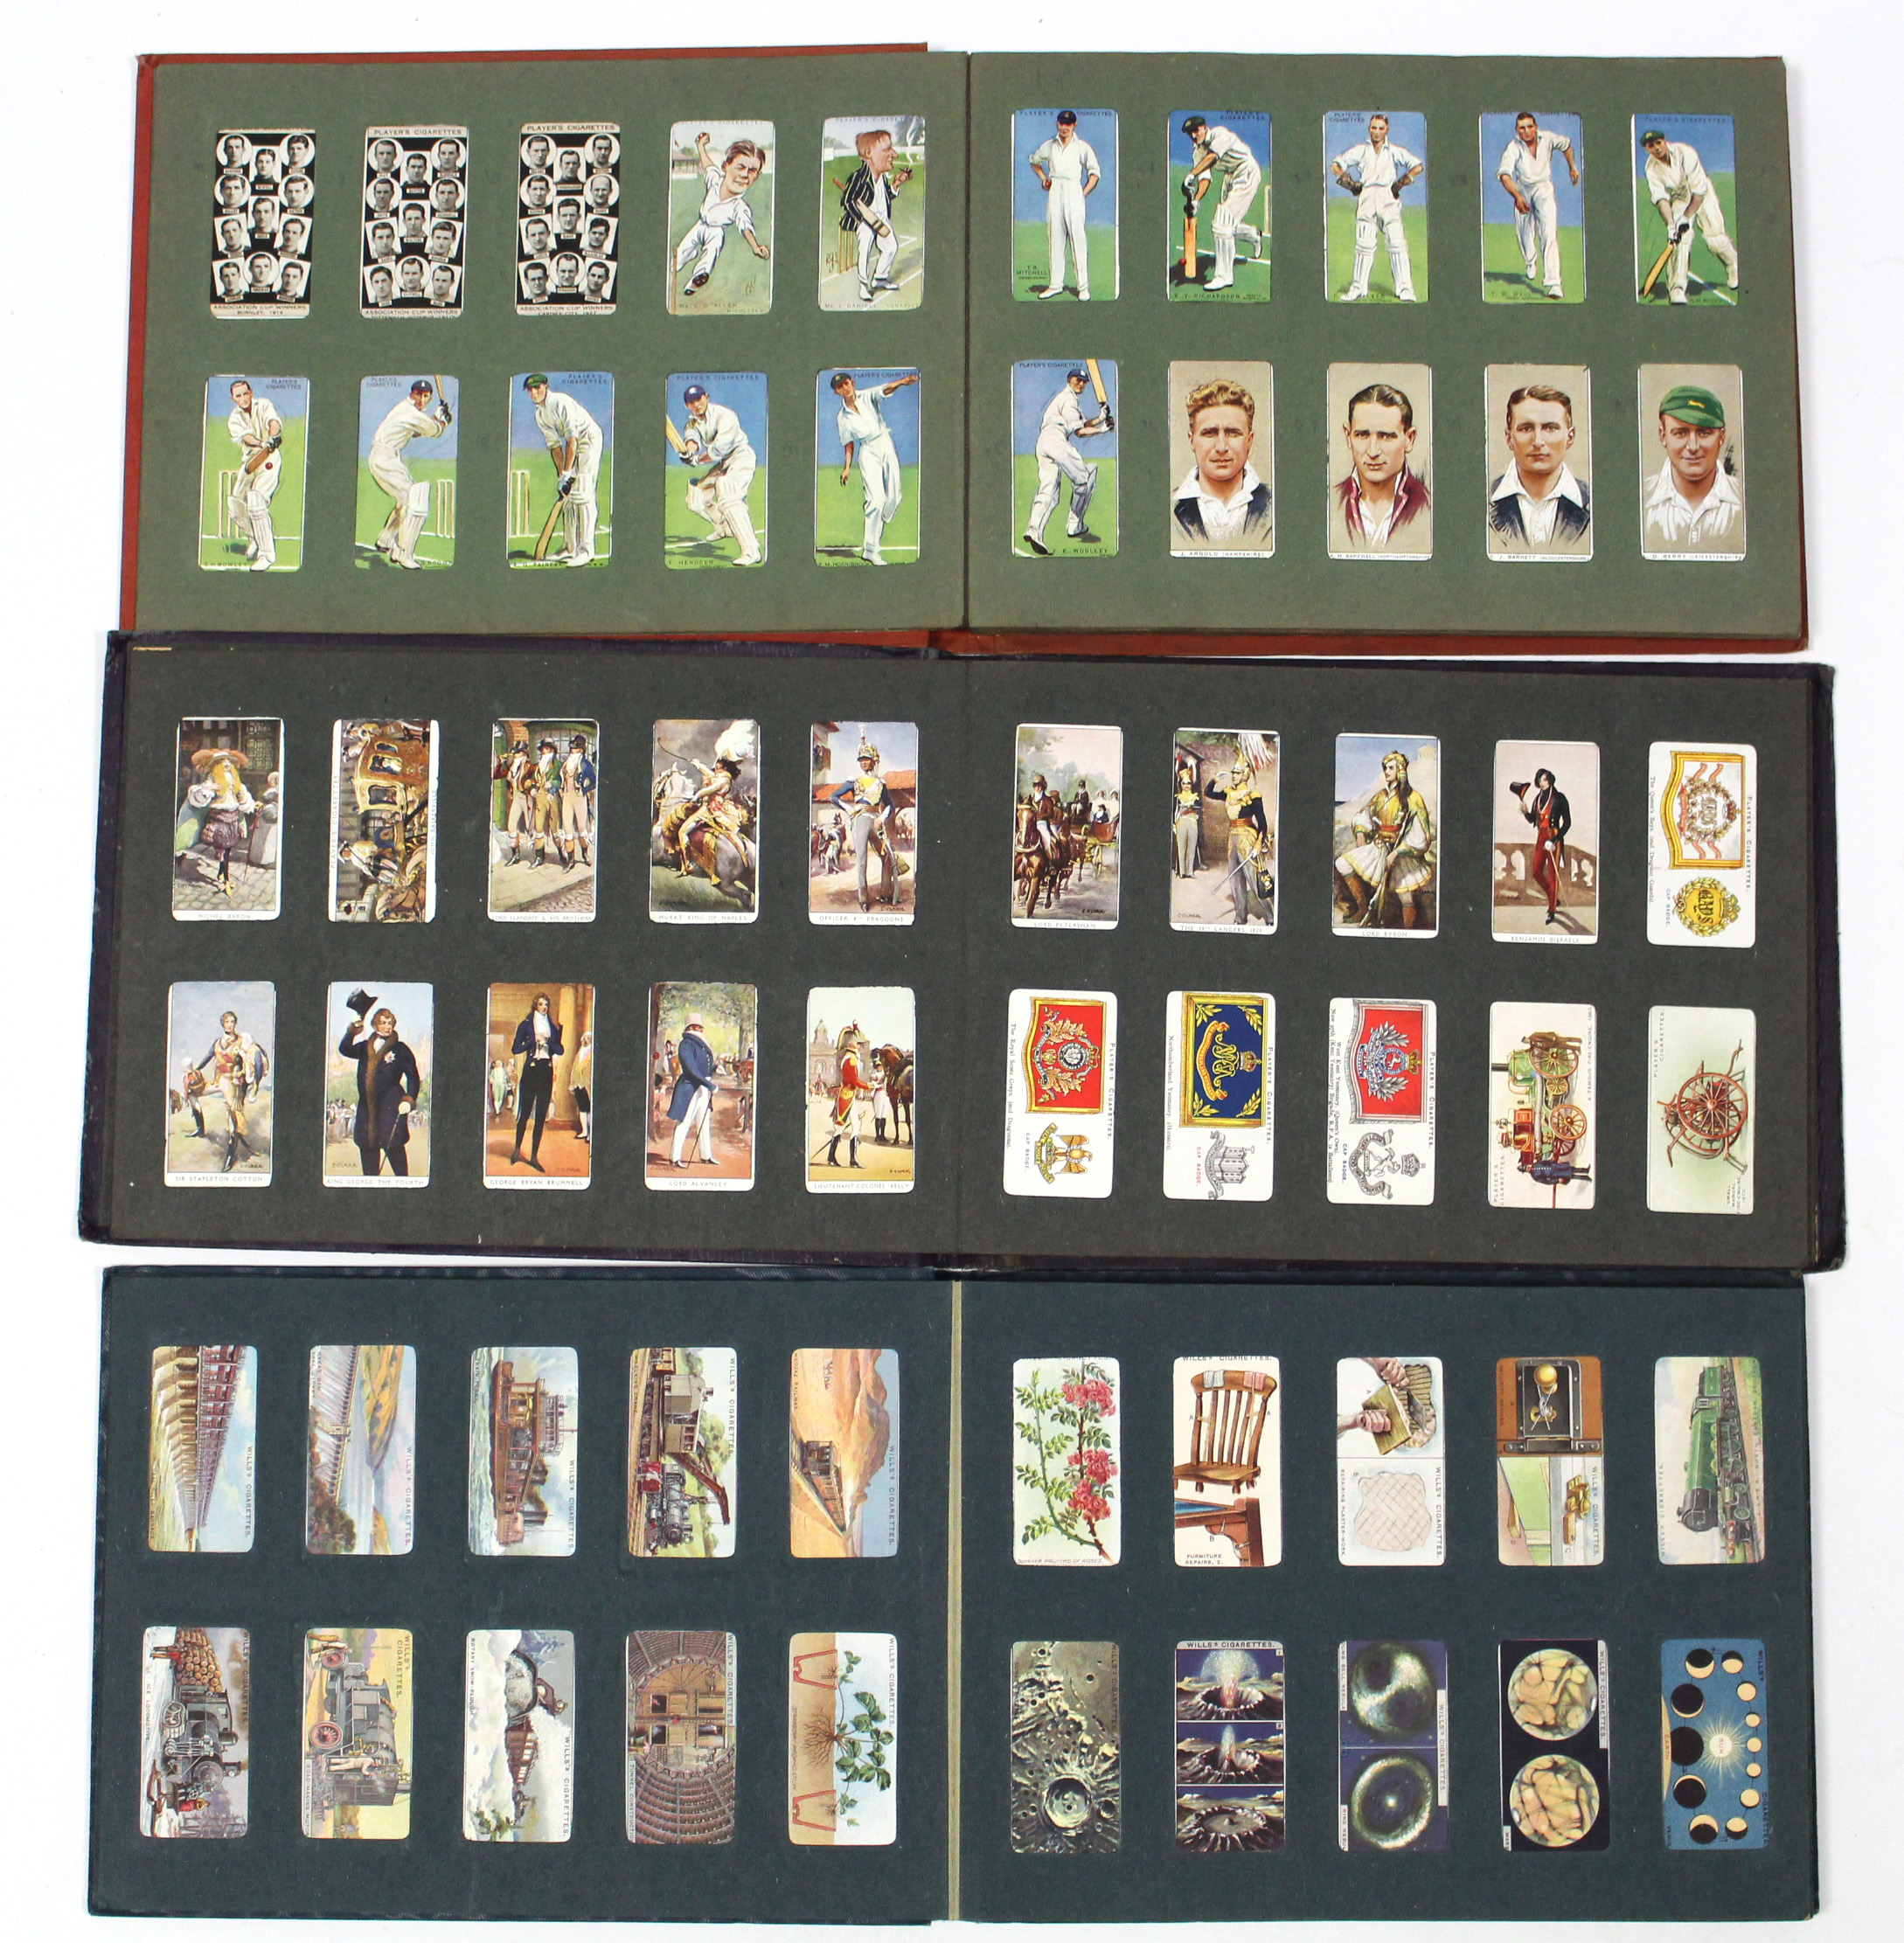 Approximately six hundred various cigarette cards by John Player, W.D. & H.O. Wills, etc.